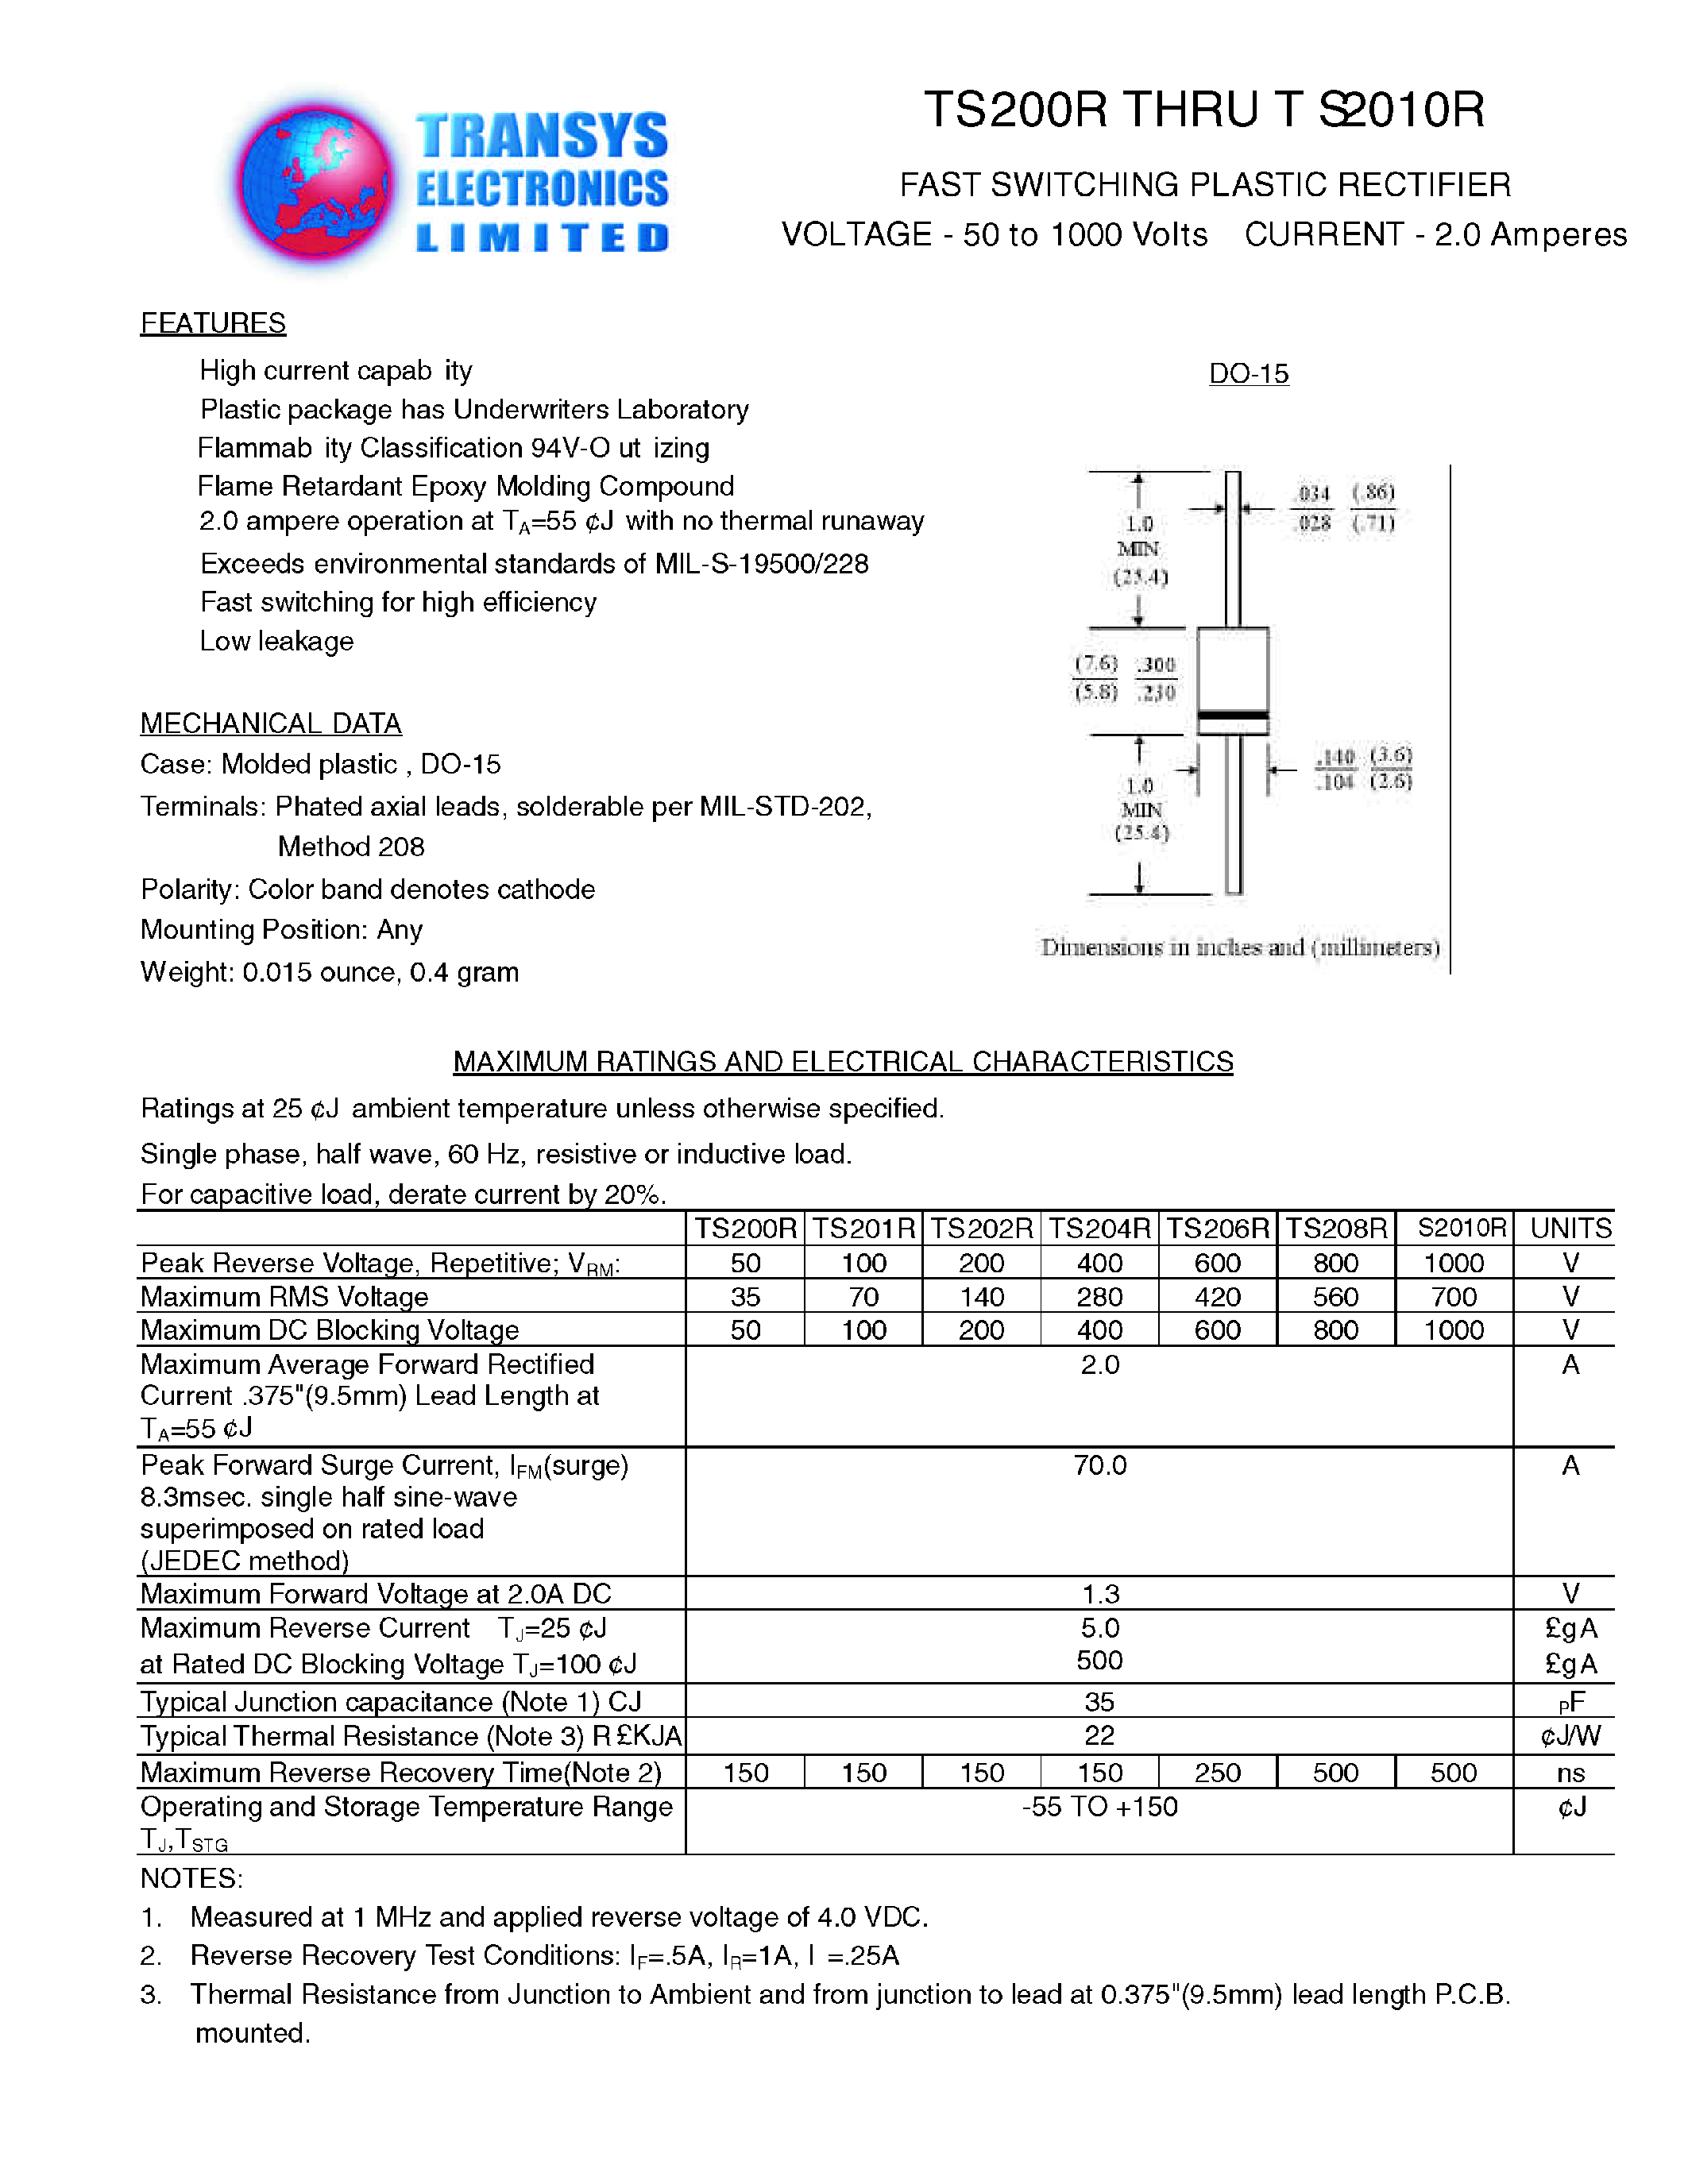 Datasheet TS202R - FAST SWITCHIING RECTIFIER(Reverse Voltage - 50 to 1000 Volts/ Current - 2.0Ampere) page 1